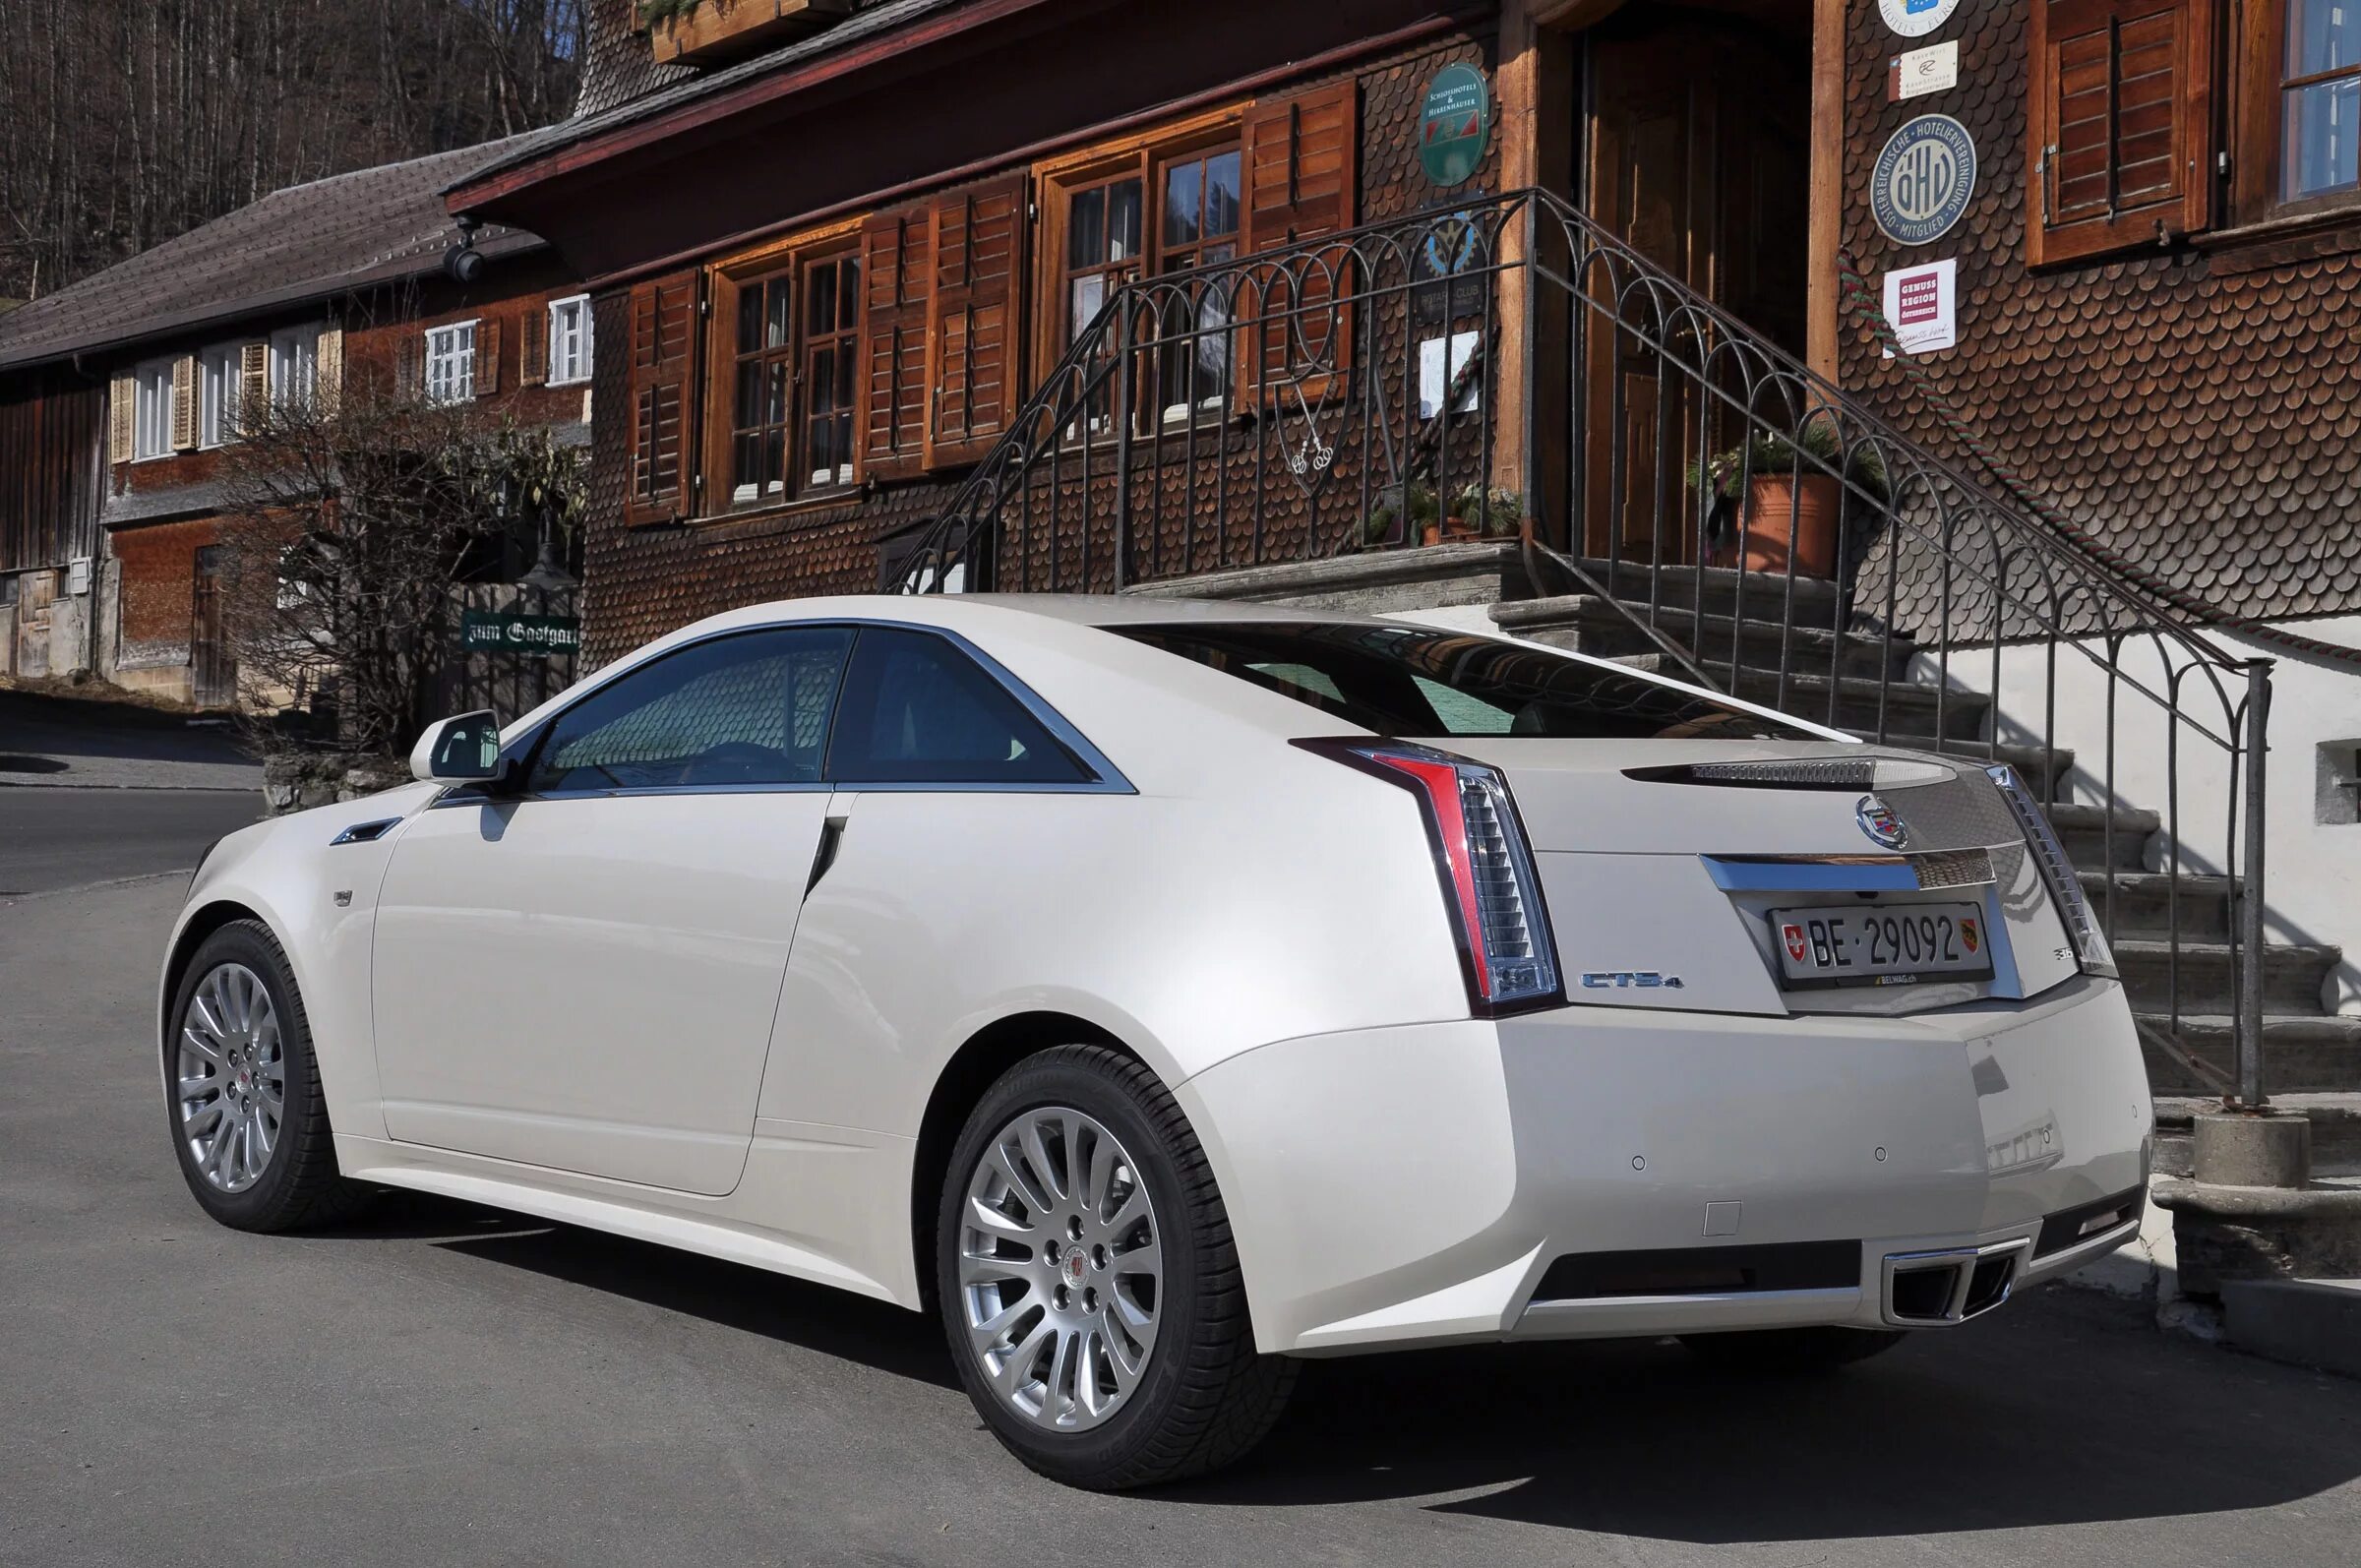 Cadillac CTS Coupe 2011. Cadillac CTS Coupe 3.6. 2012 Cadillac CTS Coupe. Кадиллак CTS 2011.